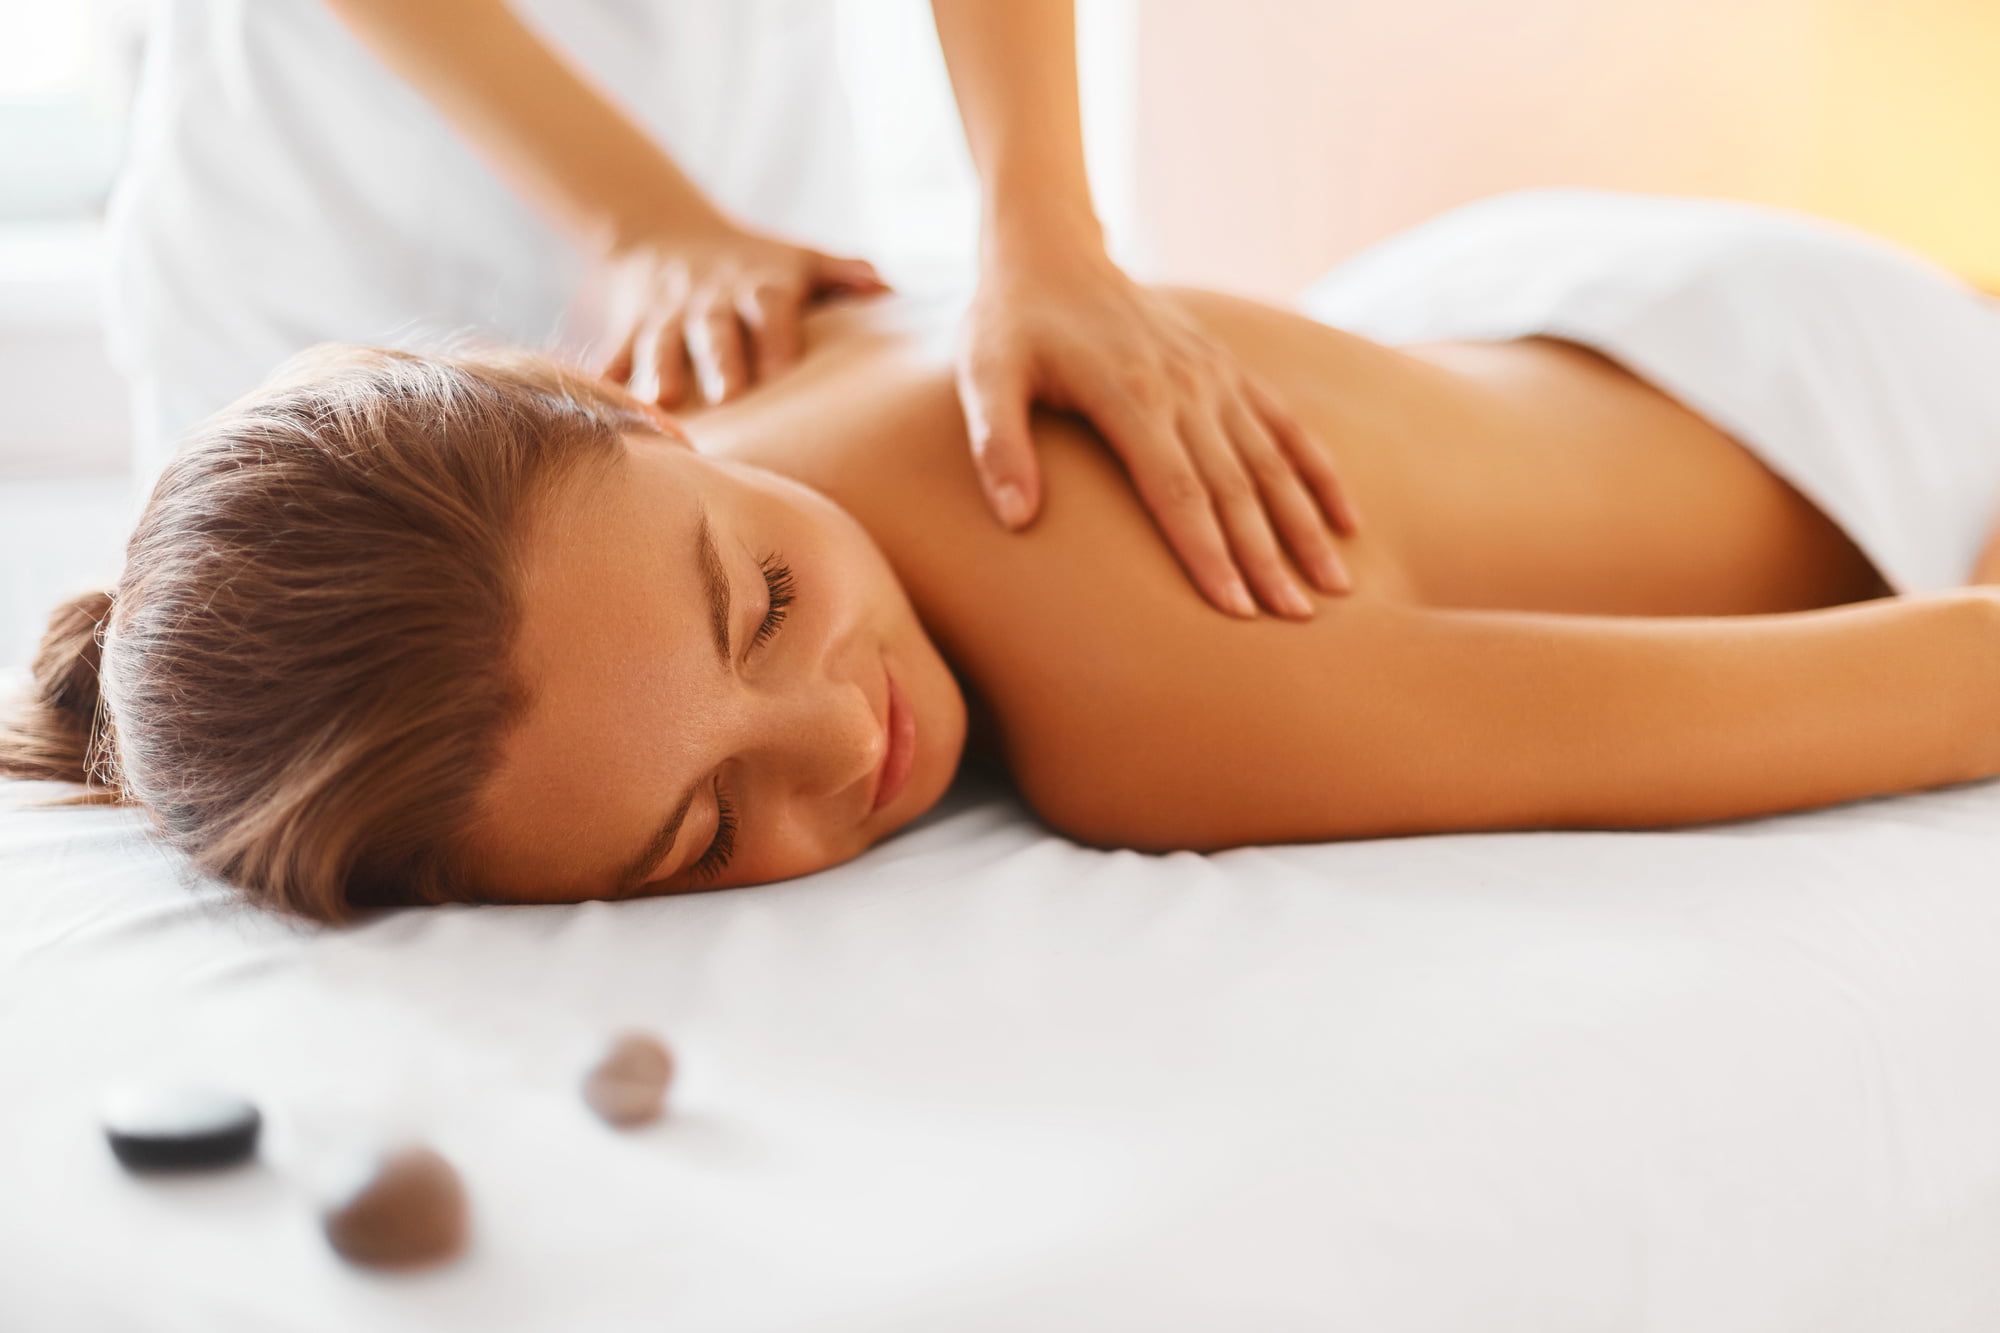 A therapeutic massage offers more than just relaxation. Discover eight reasons you should book a therapeutic massage today.